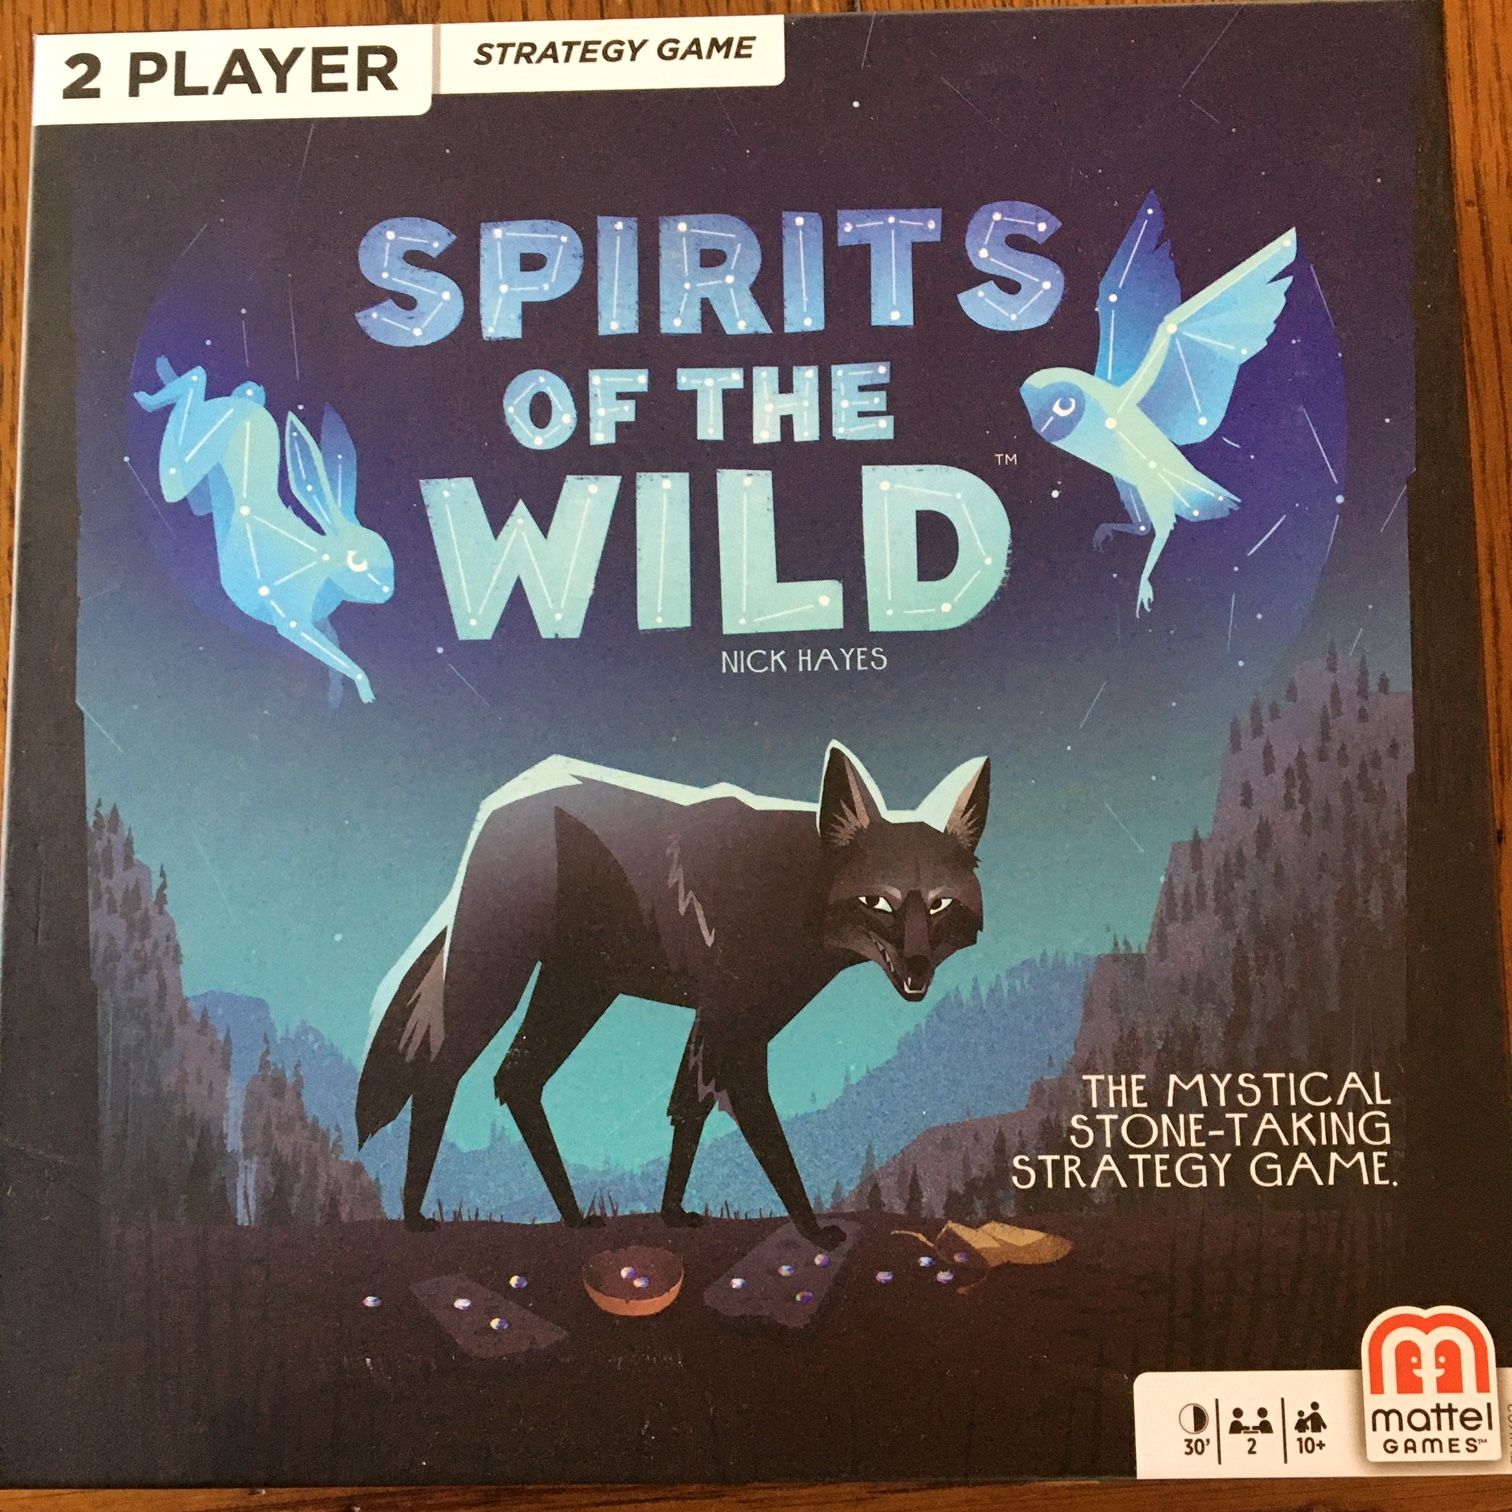 A Fantastic Game for Families. One of My Daughter's Favorite Games! |  BoardGameGeek